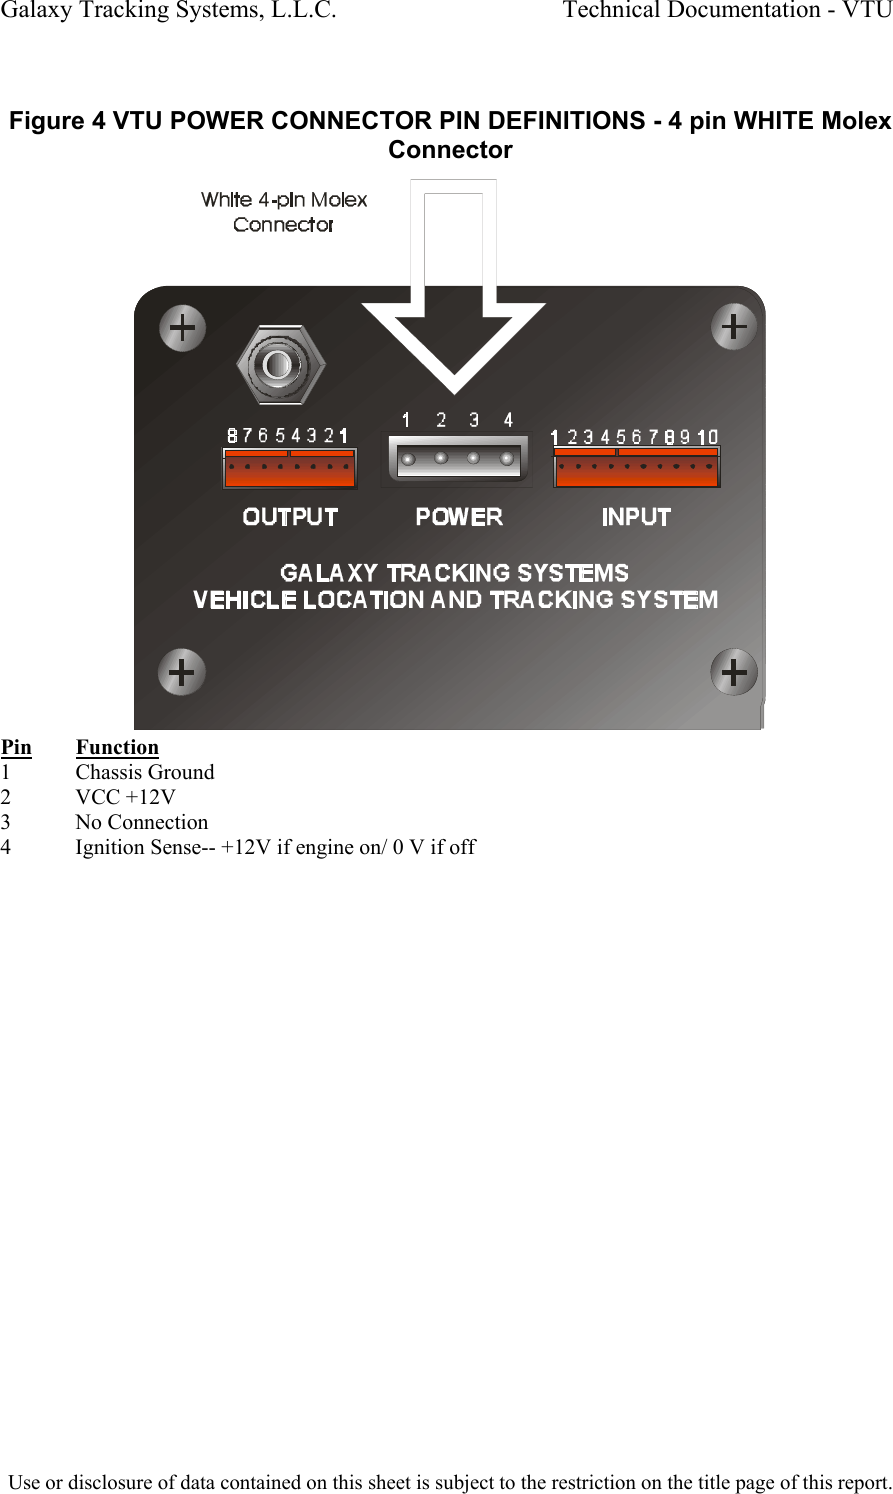 Galaxy Tracking Systems, L.L.C.                                    Technical Documentation - VTU   Figure 4 VTU POWER CONNECTOR PIN DEFINITIONS - 4 pin WHITE Molex Connector  Pin Function 1 Chassis Ground 2            VCC +12V 3 No Connection 4  Ignition Sense-- +12V if engine on/ 0 V if off  Use or disclosure of data contained on this sheet is subject to the restriction on the title page of this report.  